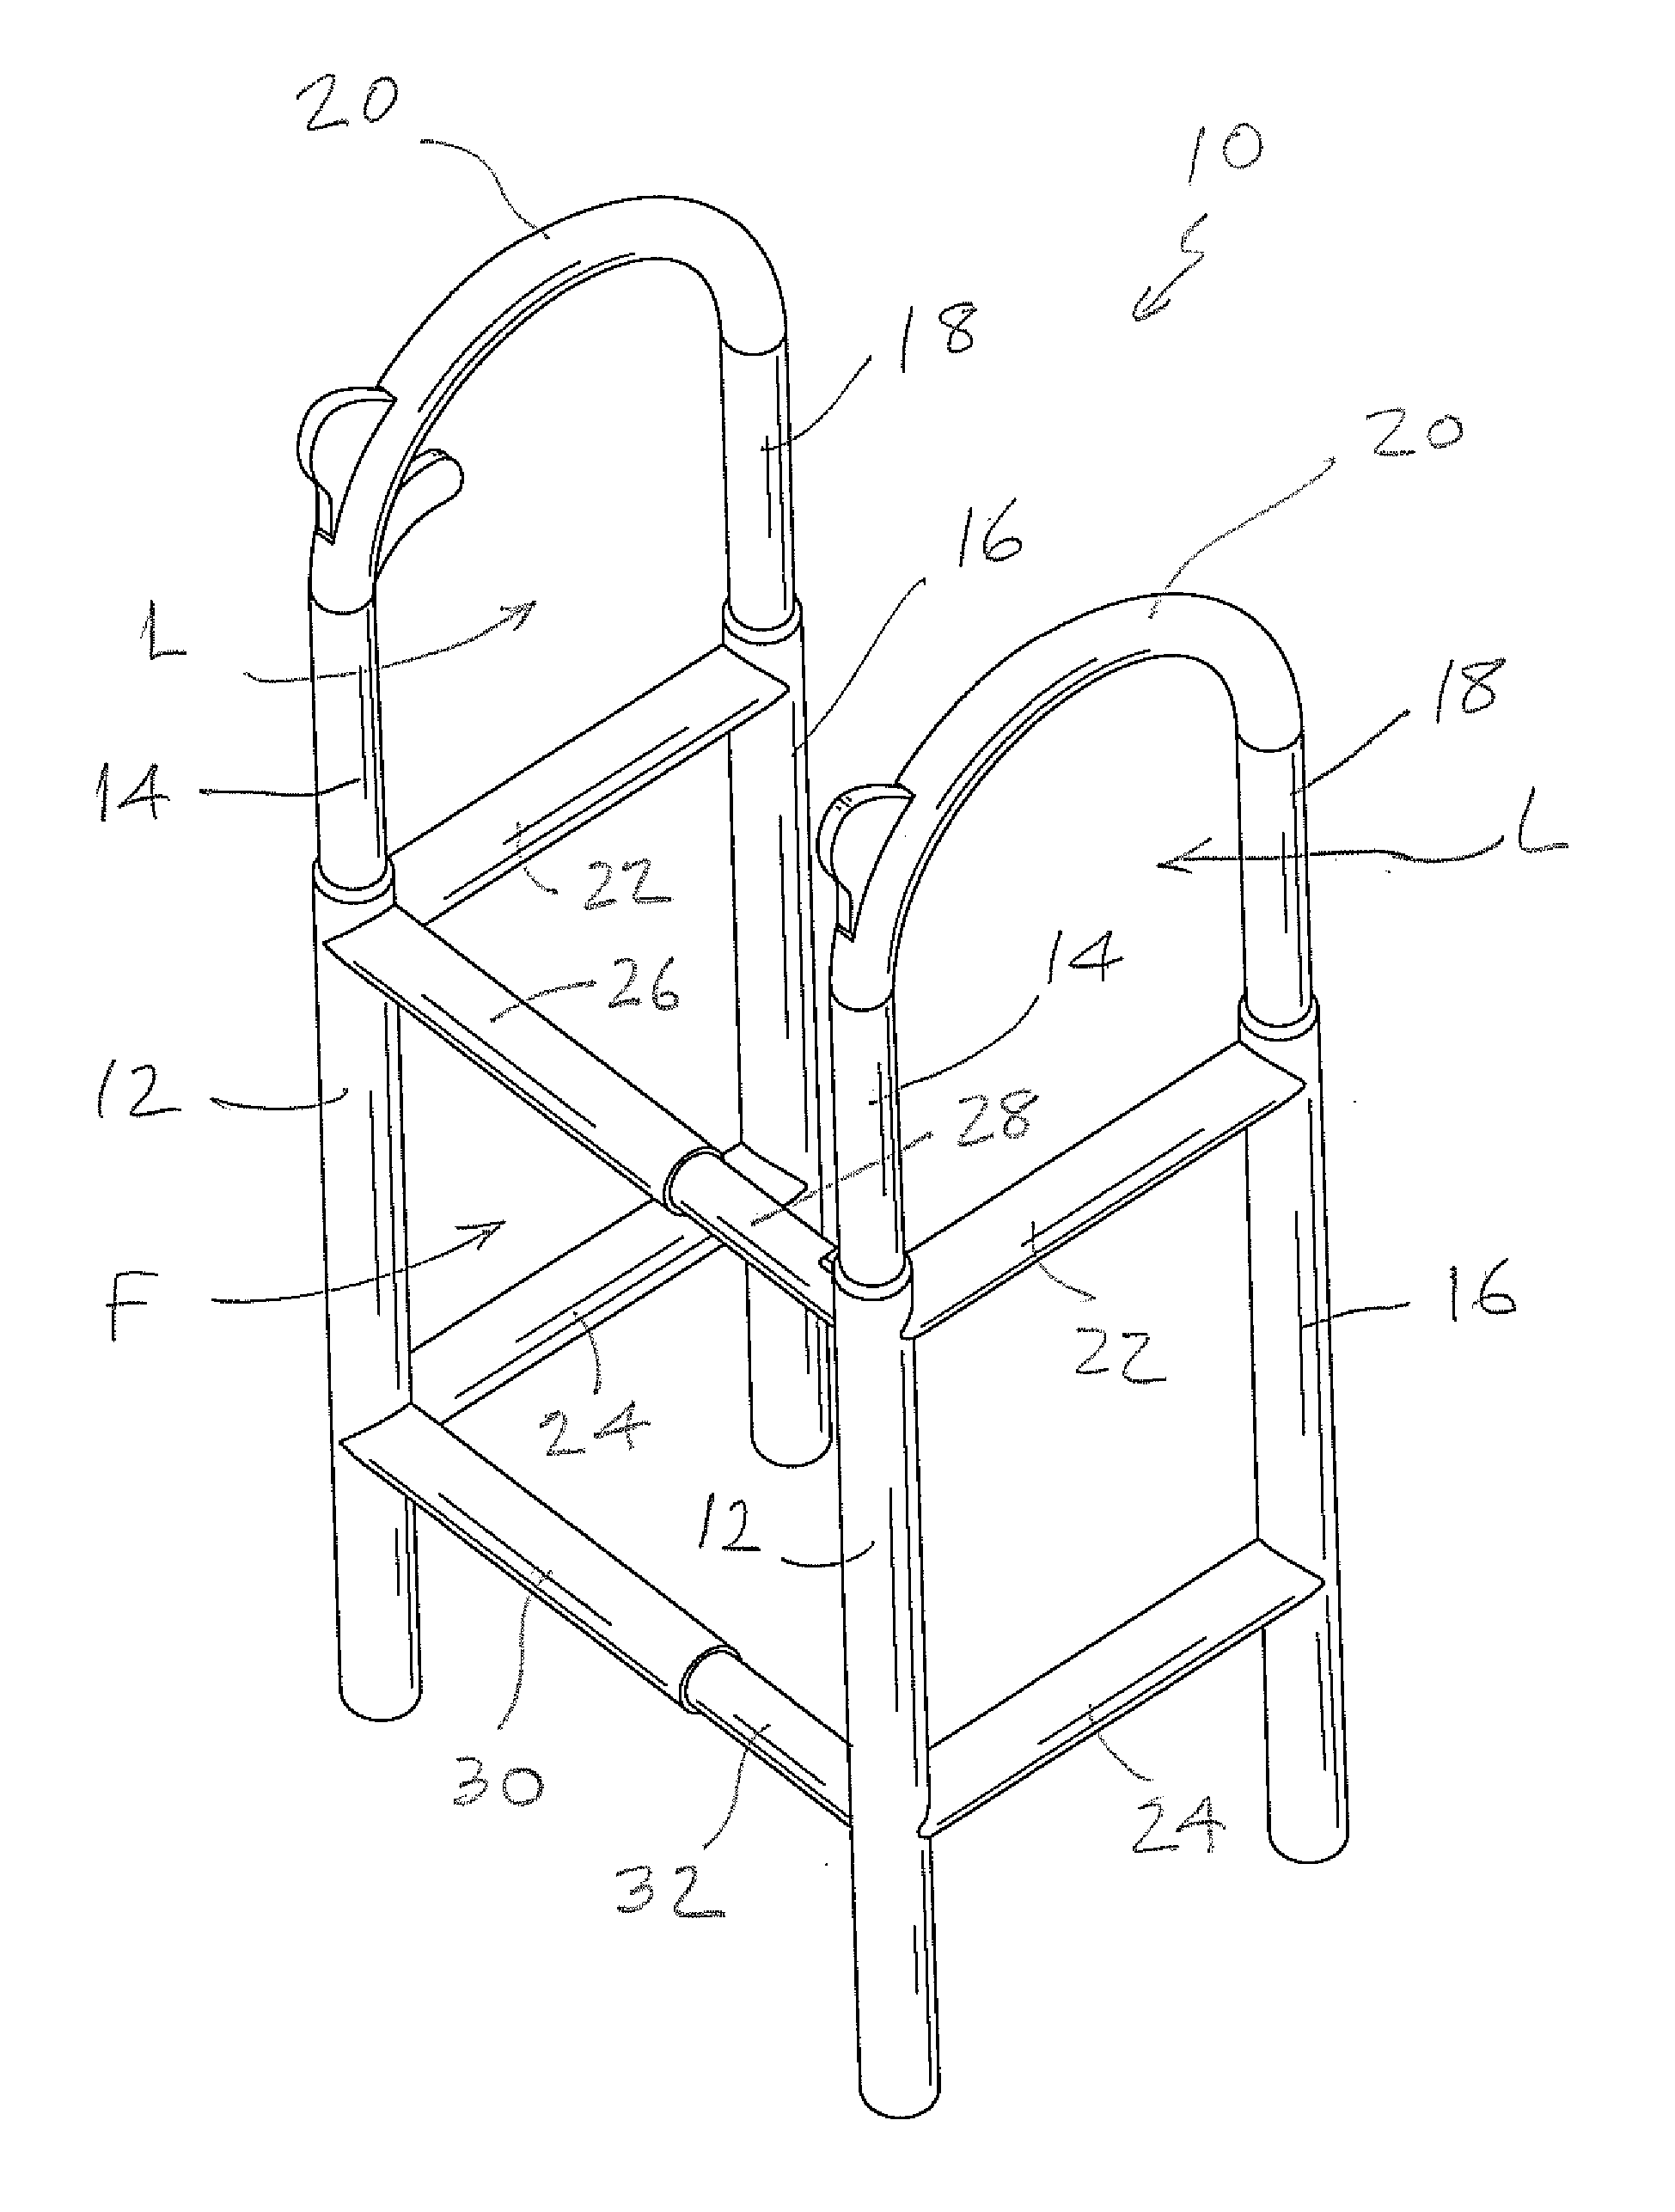 Assistive walking device with adjustable dimensions